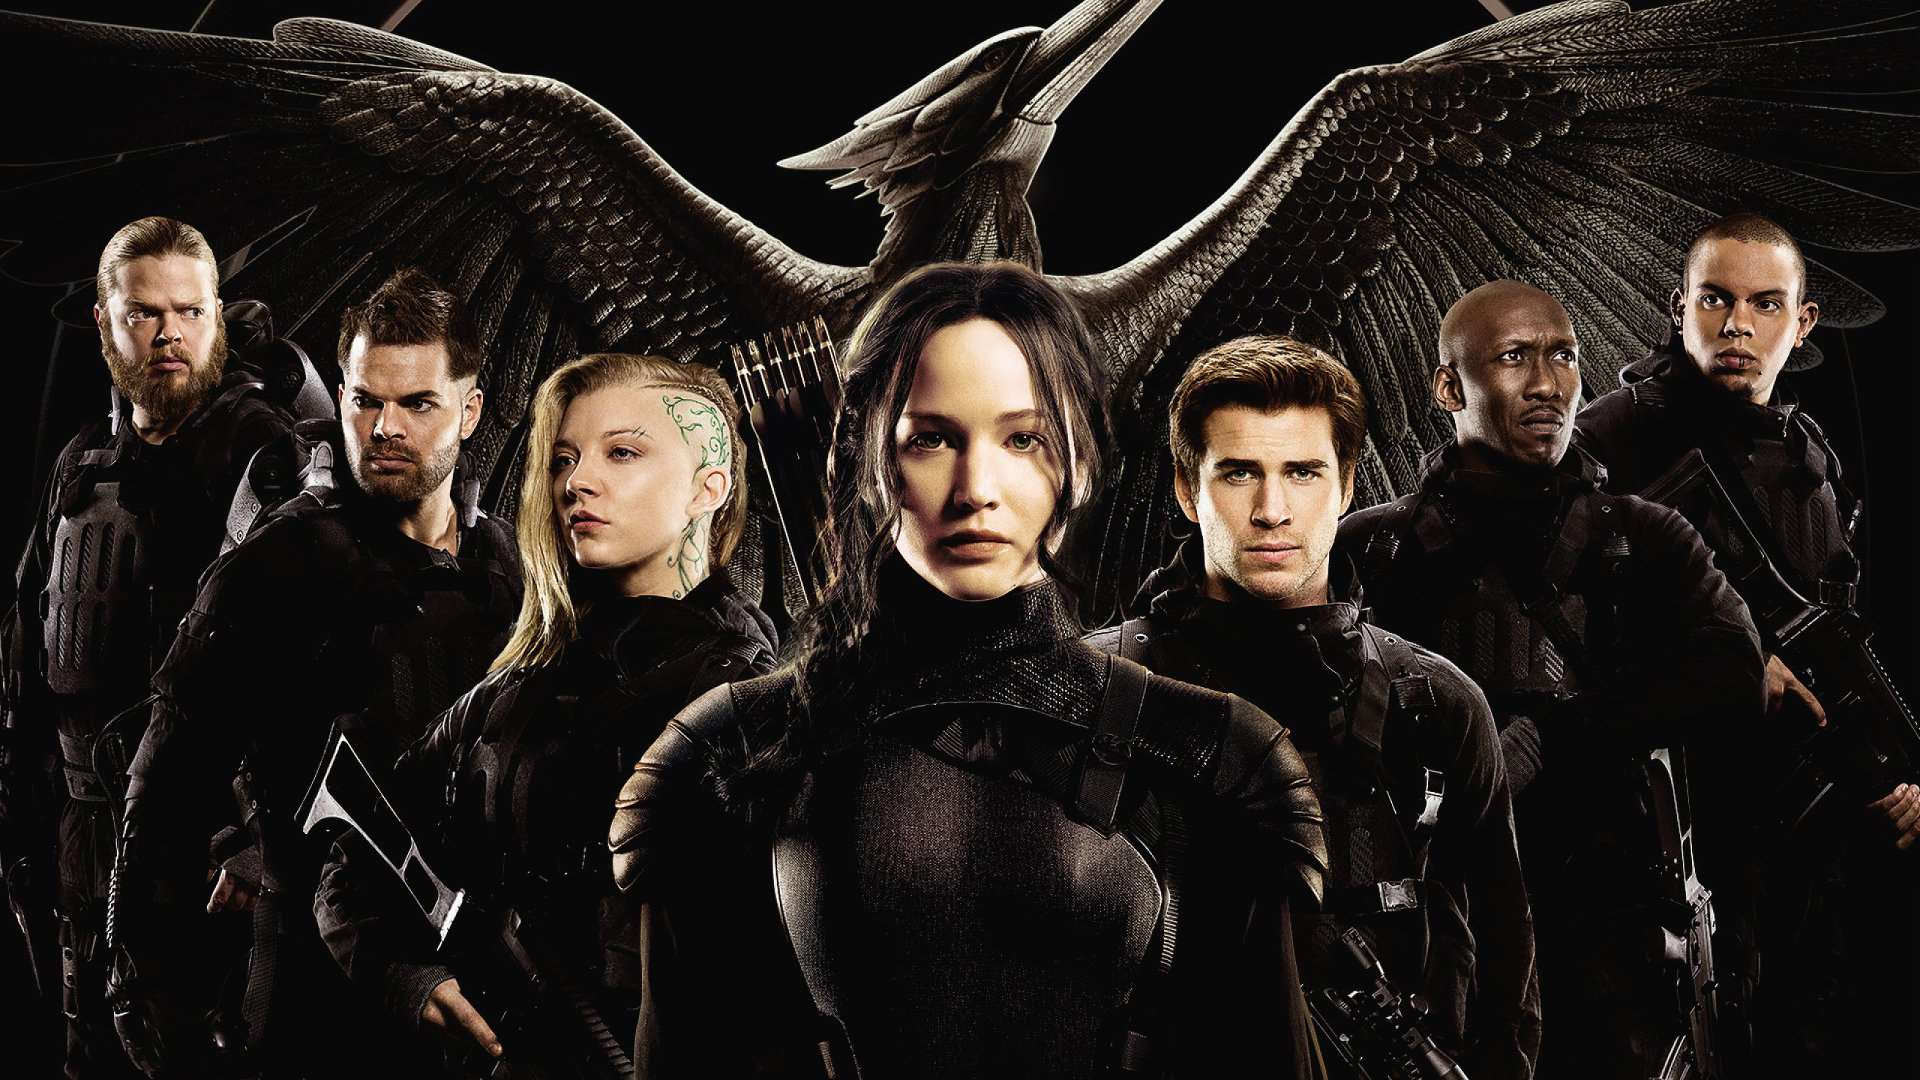 The hunger games photo